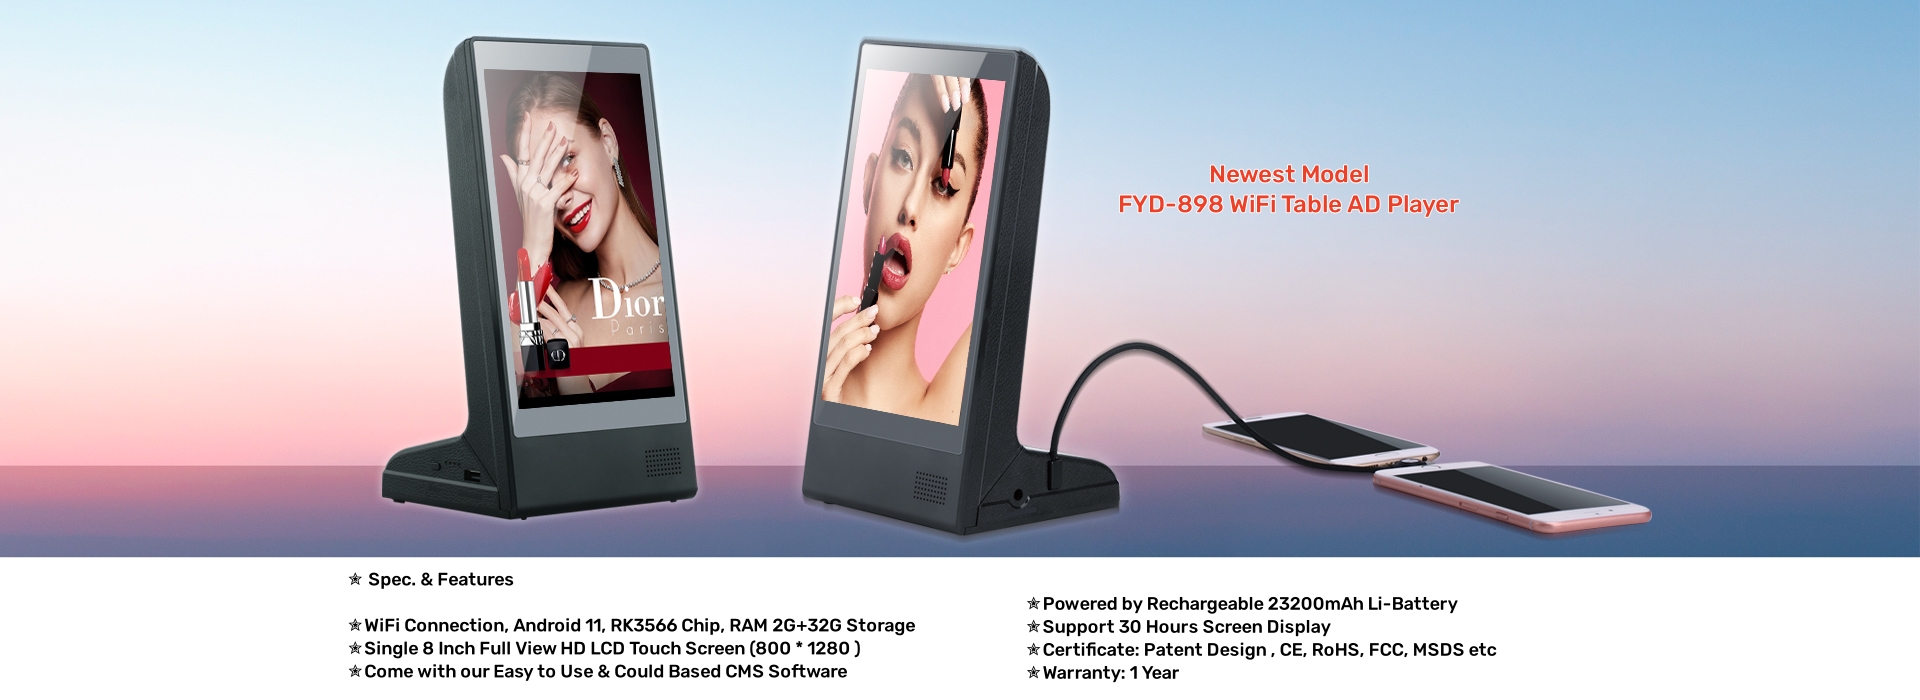 FYD-898 WiFi 8 Inch Table Advertising Player